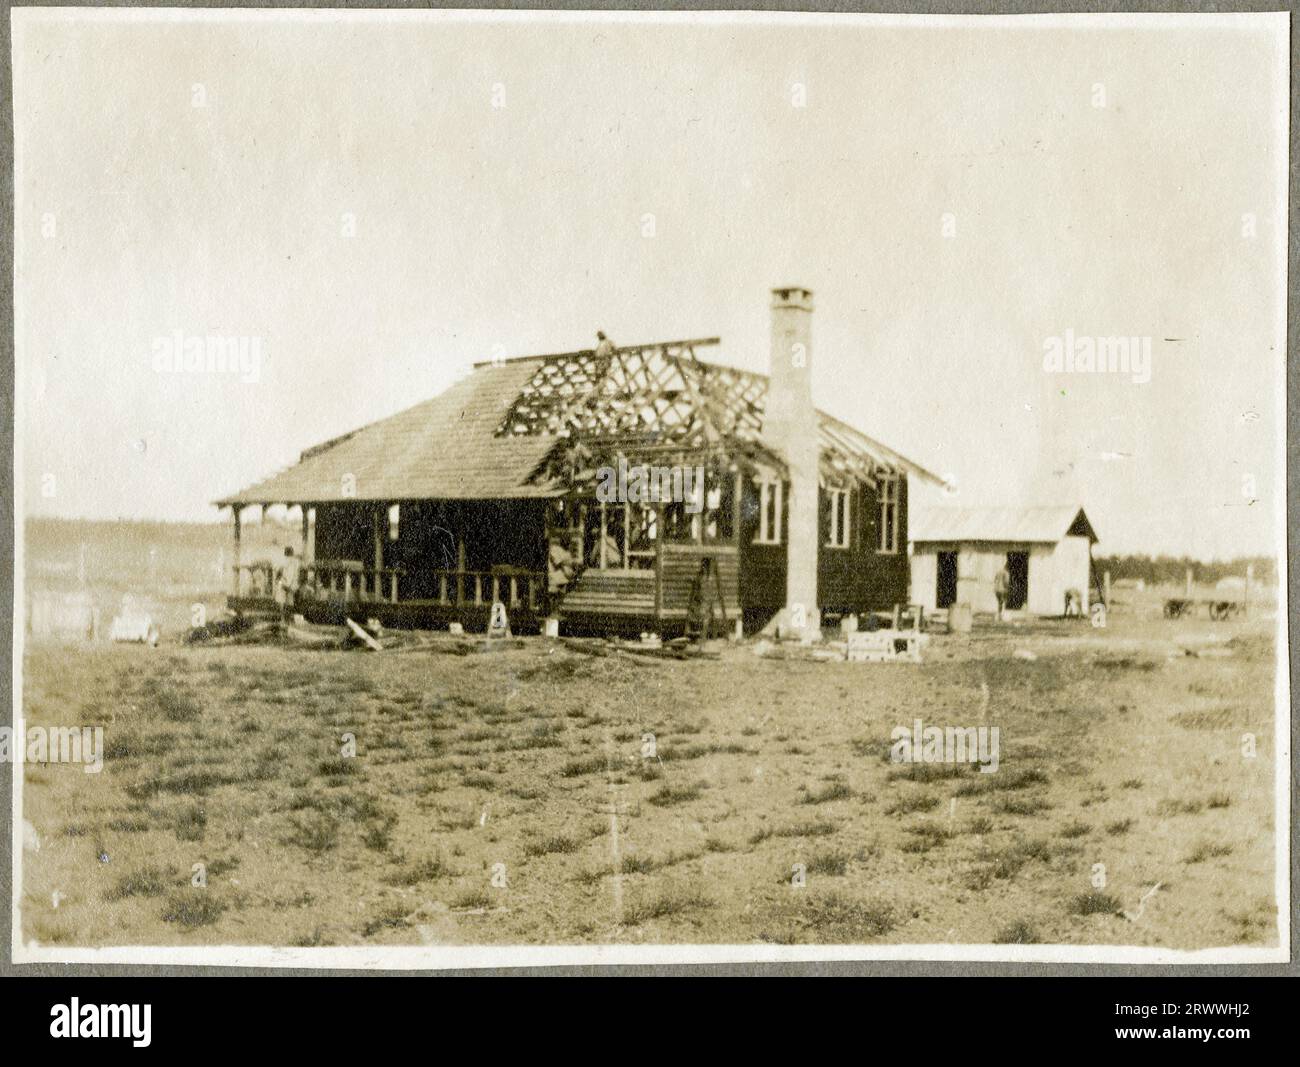 Work in progress photograph of a partially built bungalow showing the walls, chimney, rafters and some of the roof tiling in place. Part of a series showing this structure, built by Public Works Dept. apprentices for their instructor Mr Bungey in early 1922. Stock Photo